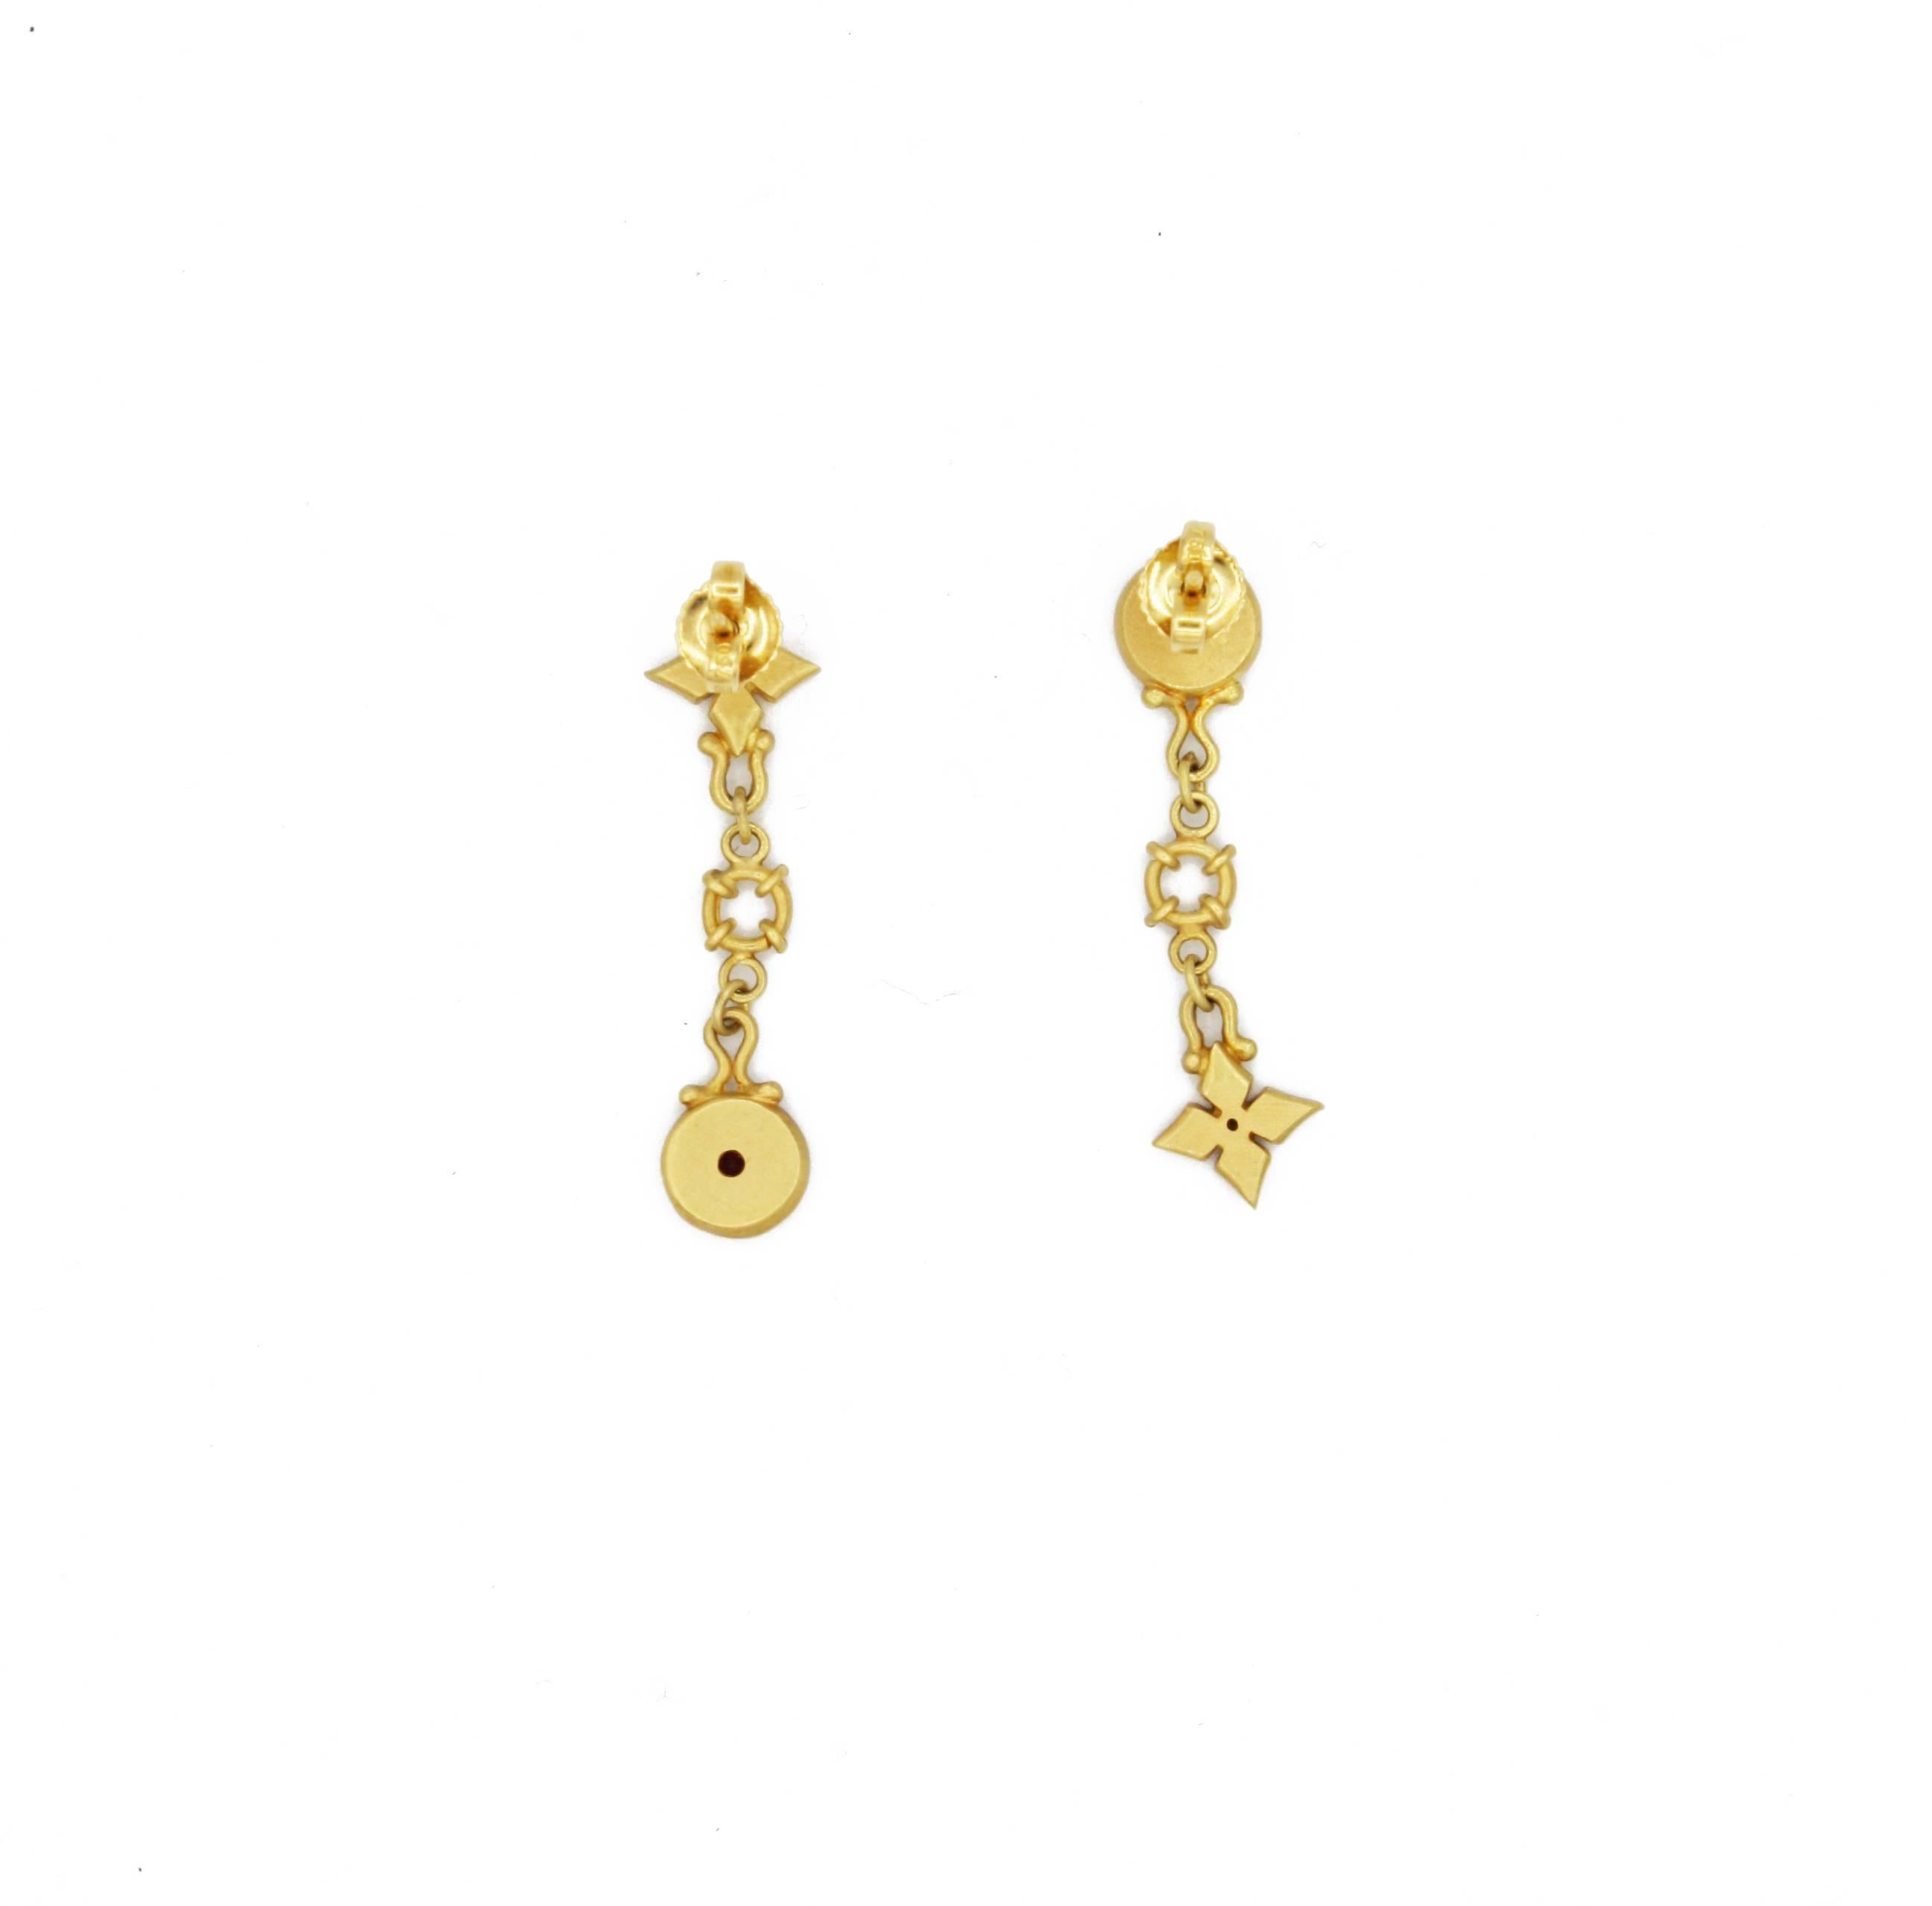 These delicate 18kt yellow gold earrings are from Renato Cipullo's 